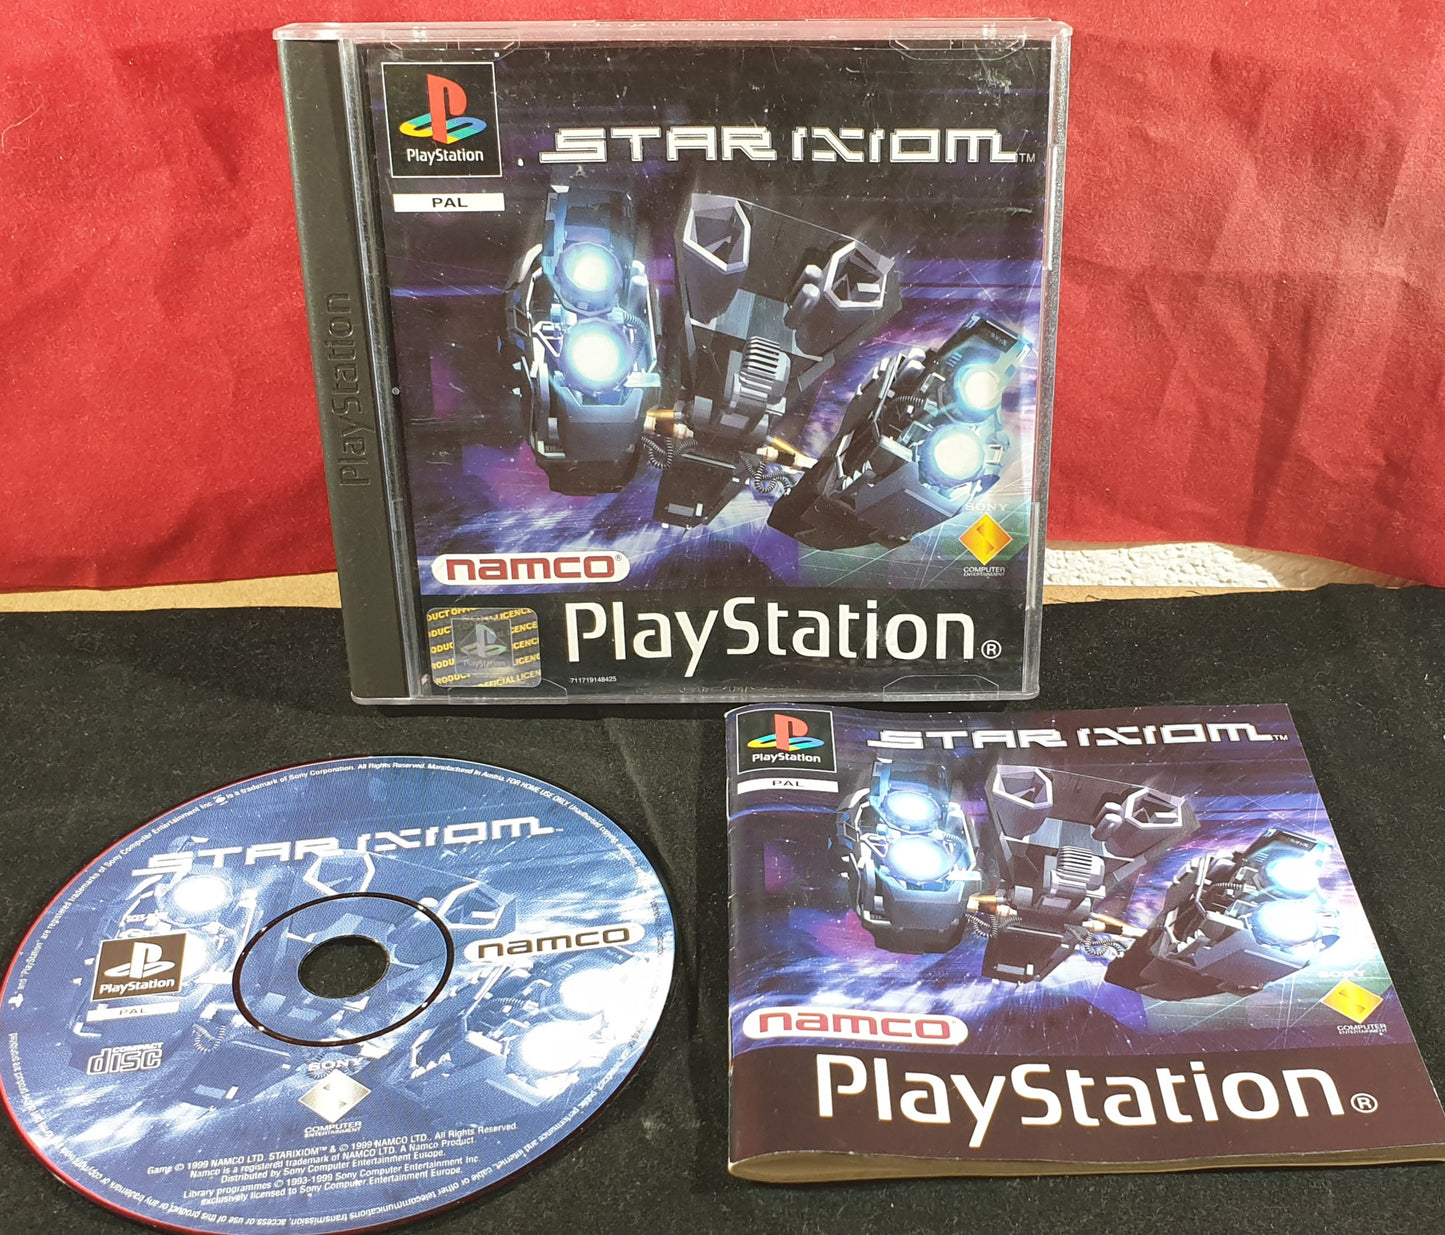 Star Ixiom Sony Playstation 1 (PS1) Game